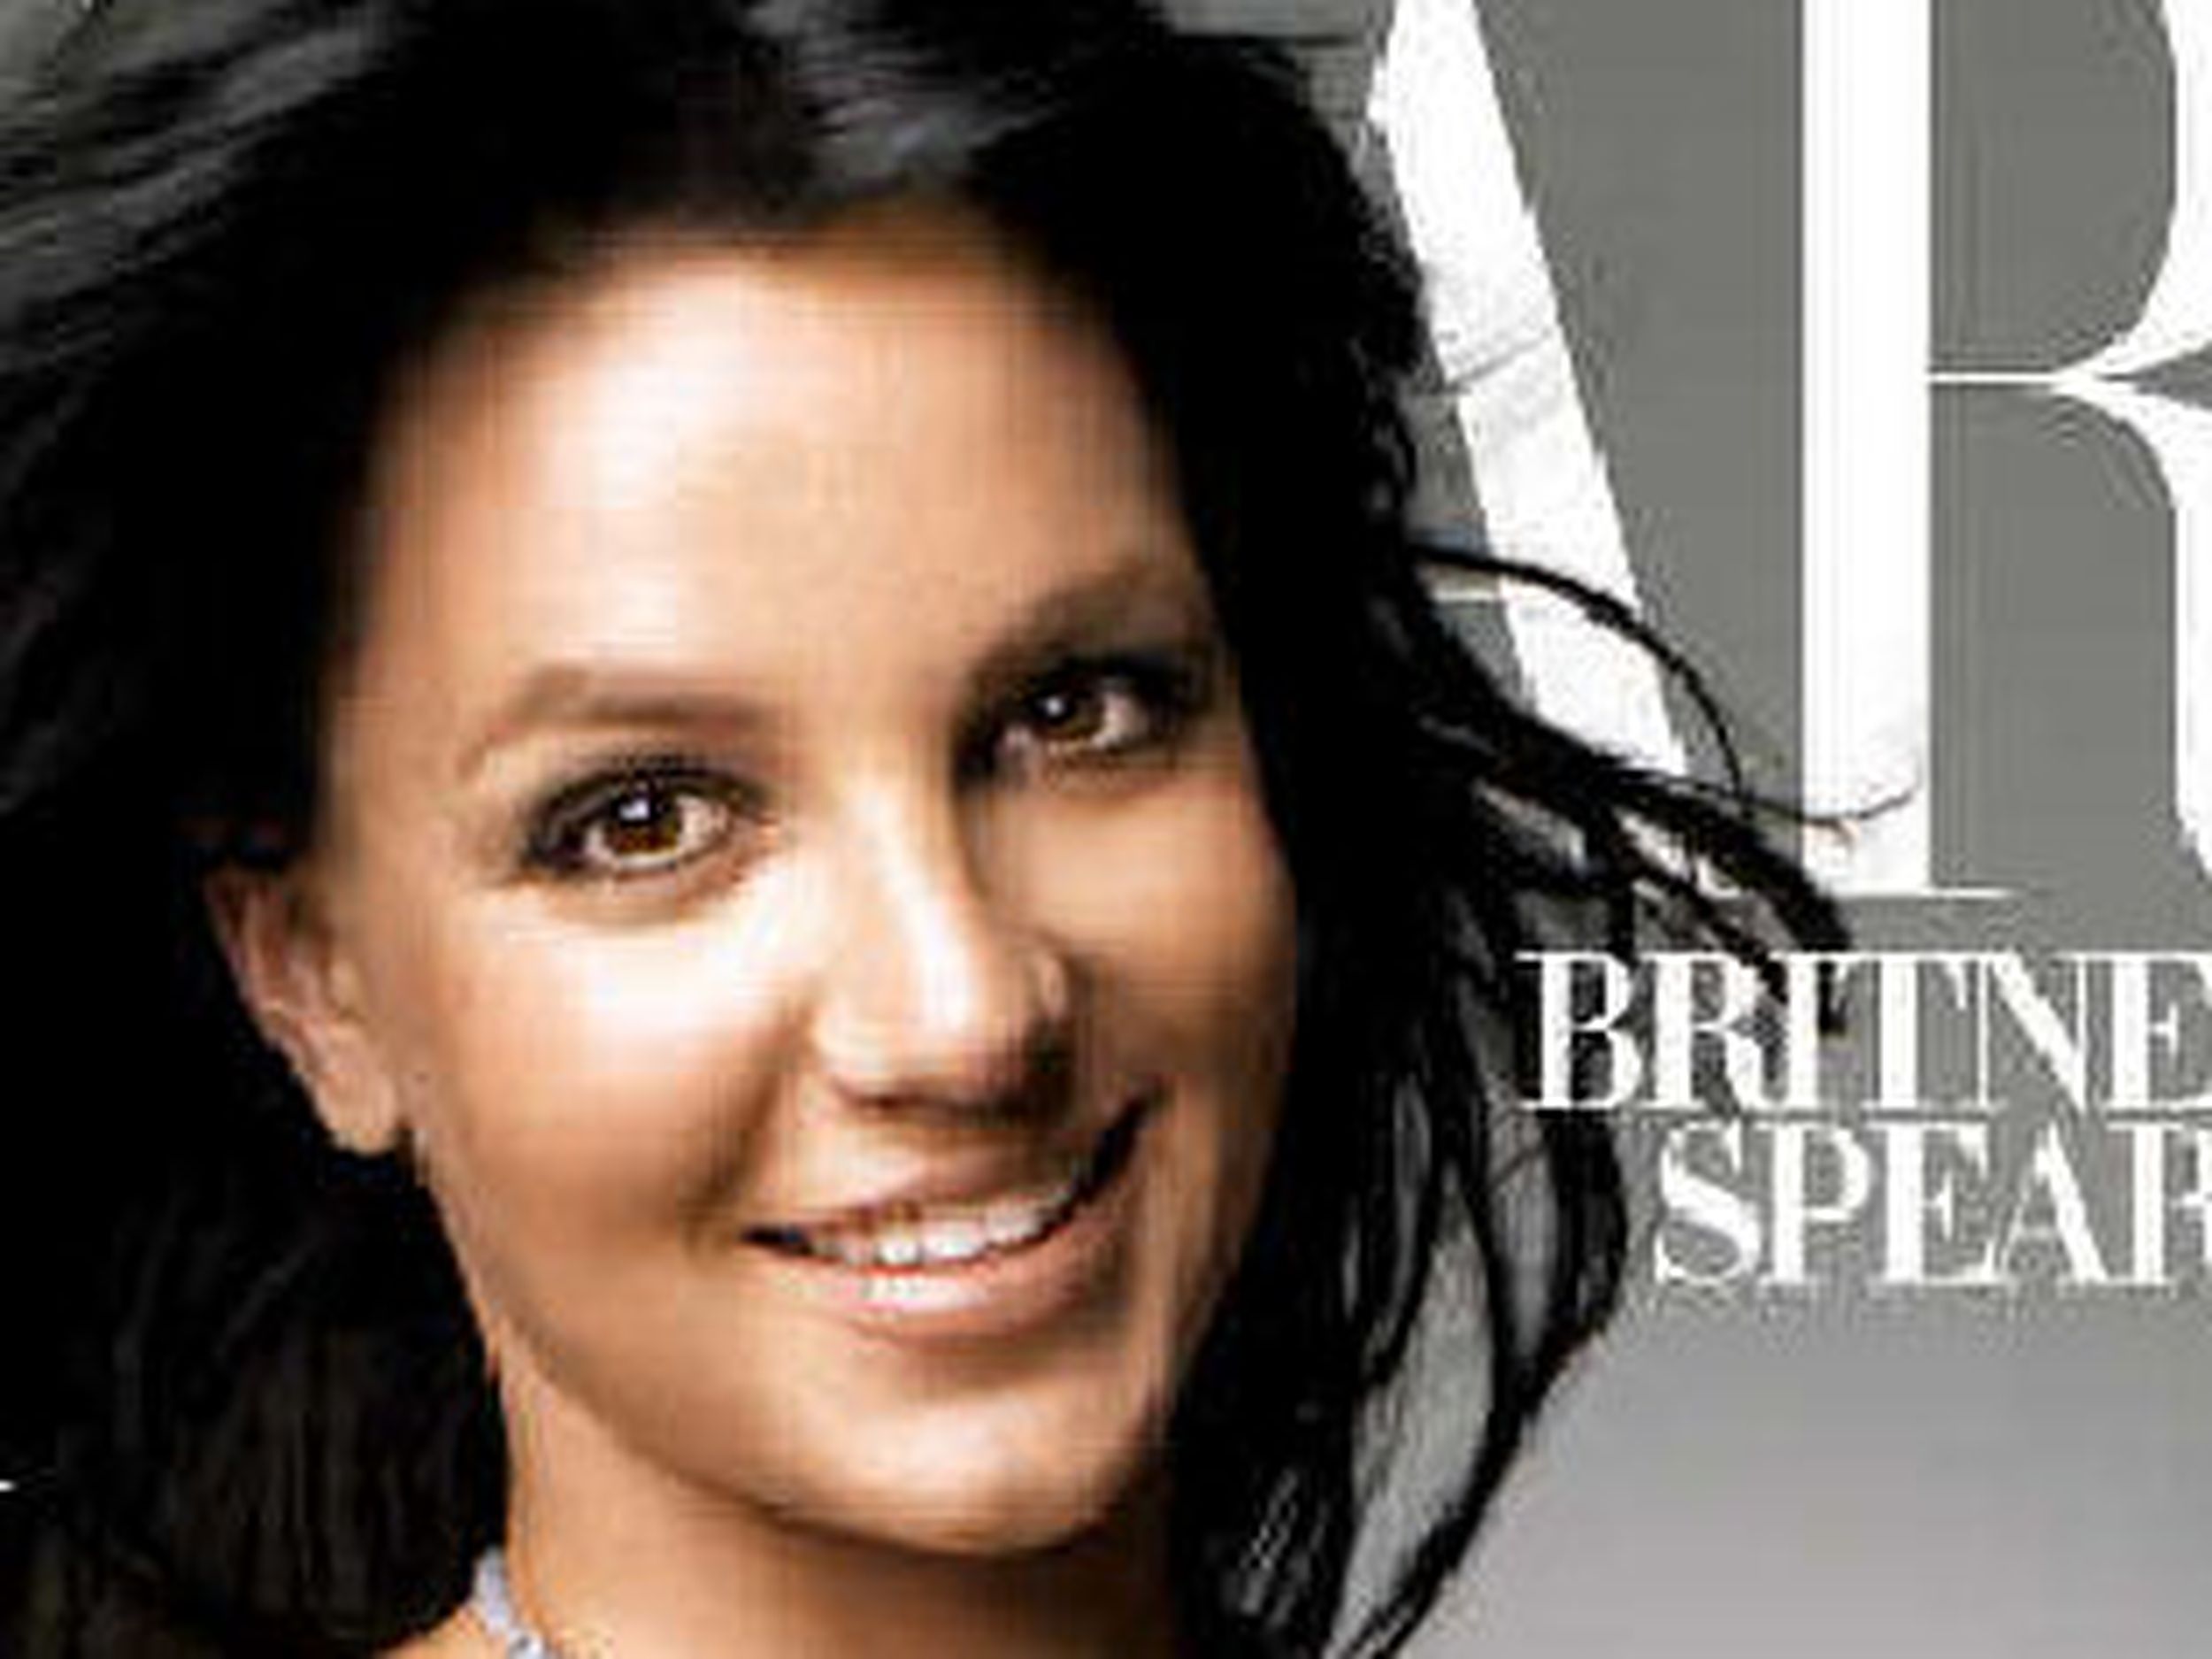 Hardcor Sex Tapes Britney Spears - People: That's what you call child-baring | The Spokesman-Review